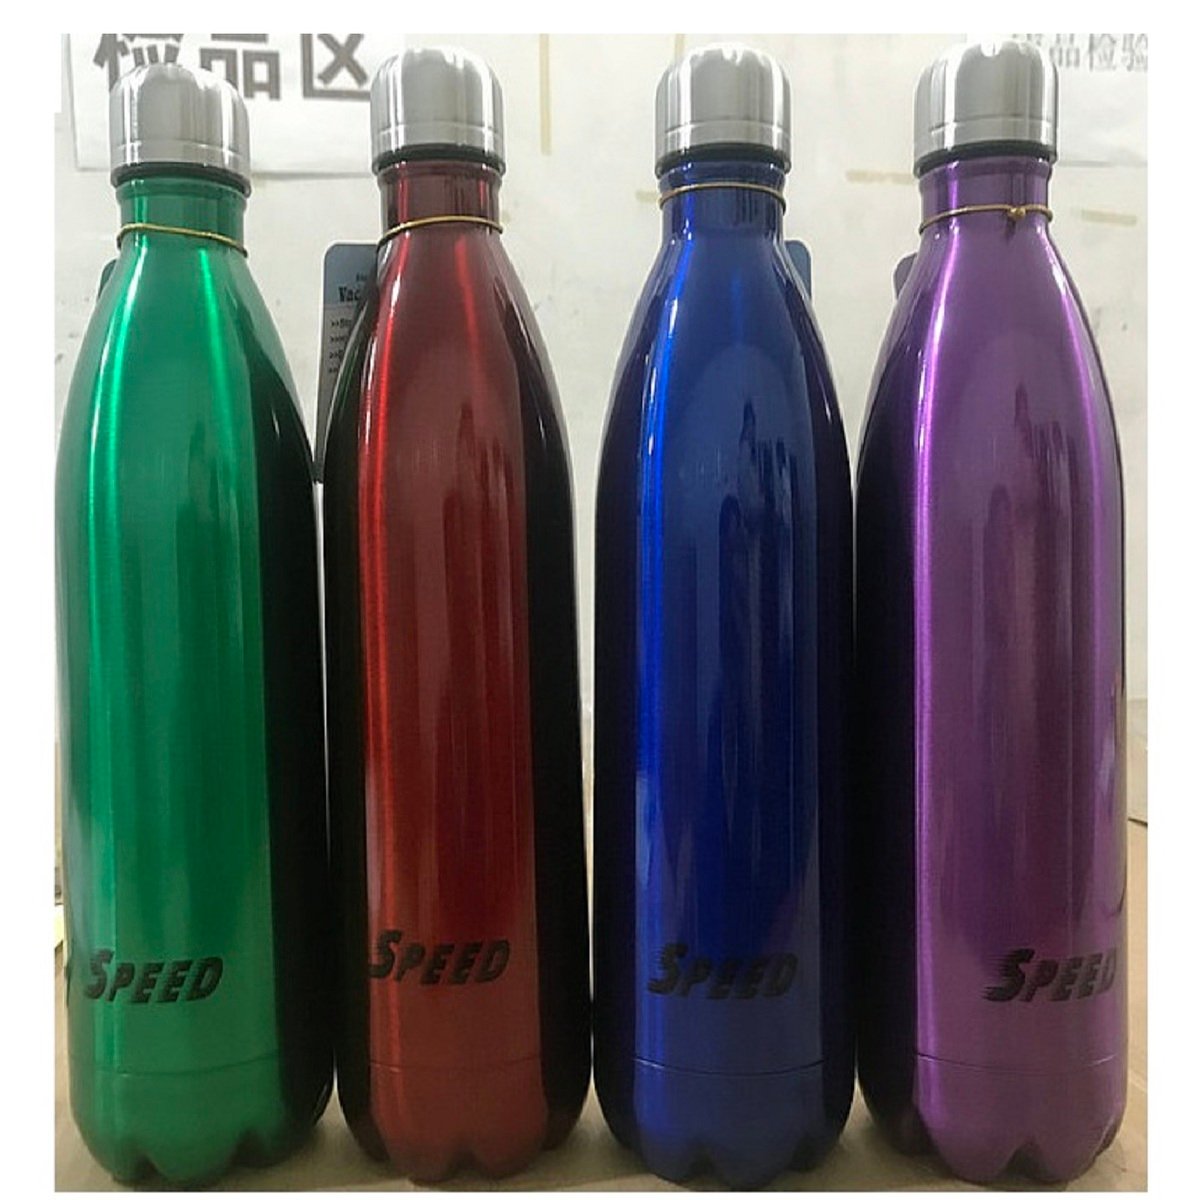 Speed Stainless Steel Vacuum Bottle KL13 1000ml Assorted Colors